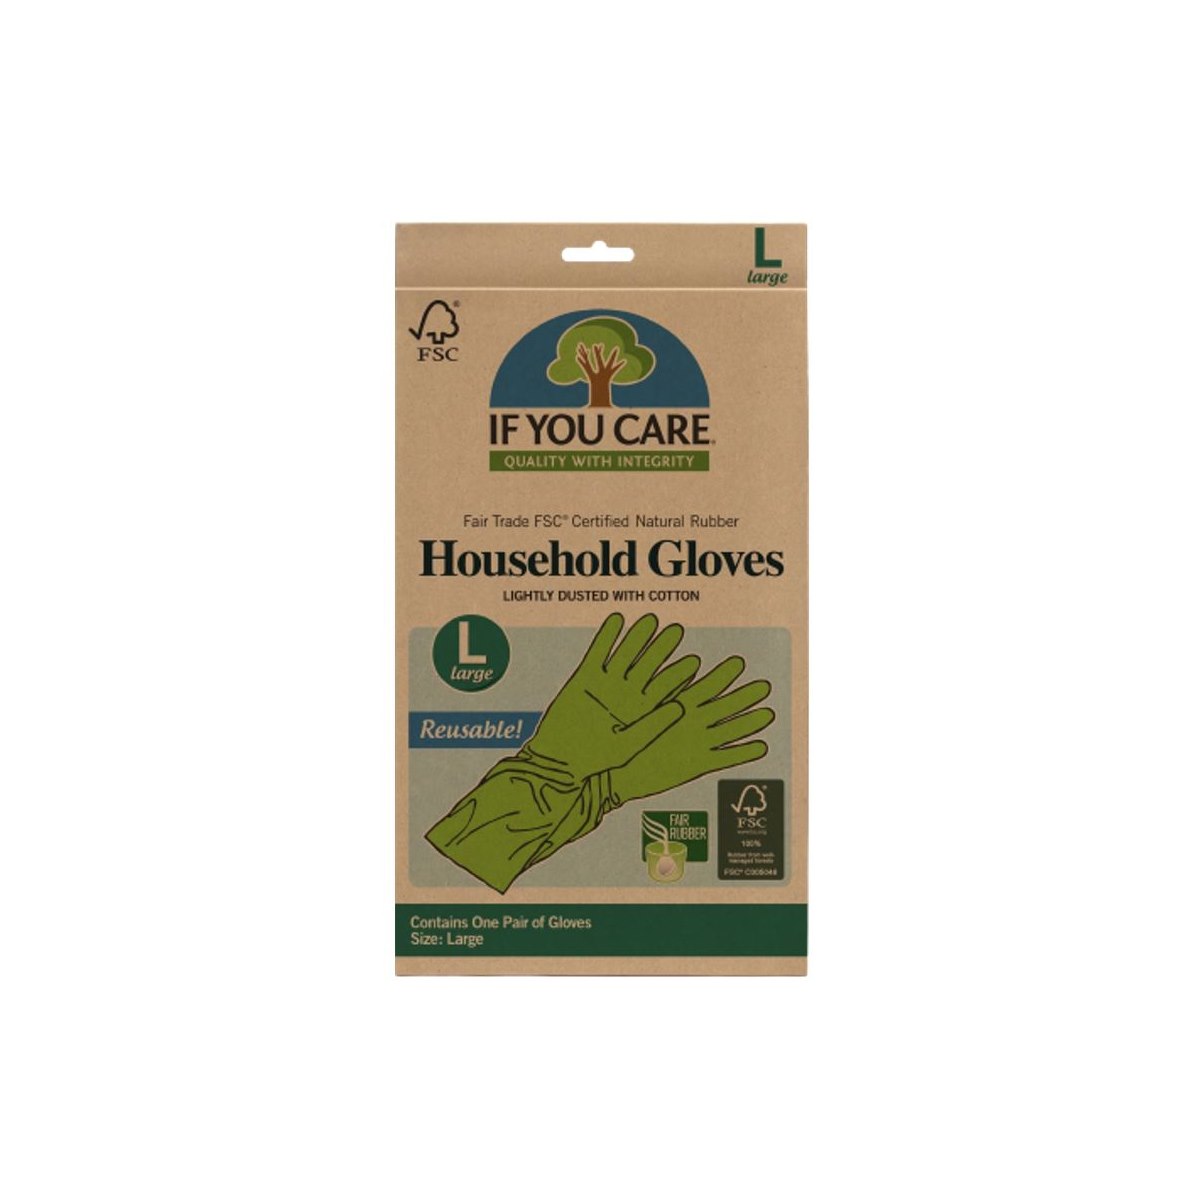 If-you-care-household-gloves-large